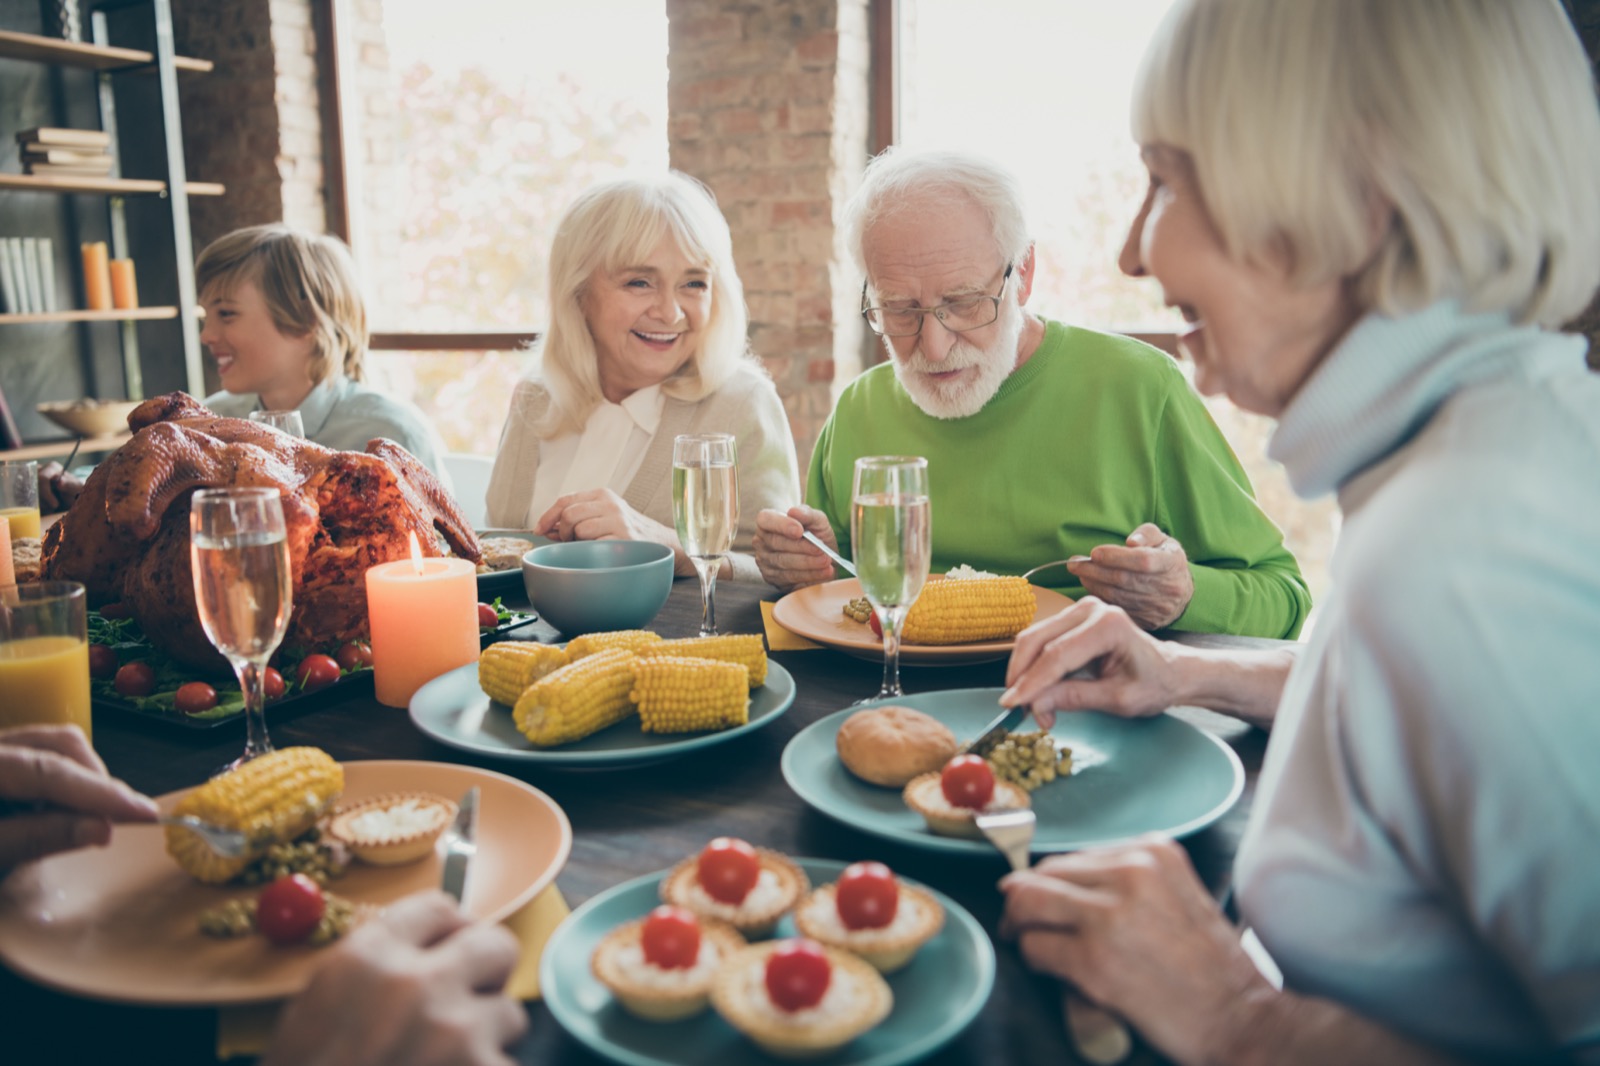 It’s Easy to Tell If You’re More American, British or Australian Just by Your Eating Habits Portrait Of Nice Lovely Cheerful Cheery Friendly Big Full Family Eating Brunch Lunch Delicious Autumn Fall Season Tradition Generation Gathering In Modern Loft Industrial Style Interior House